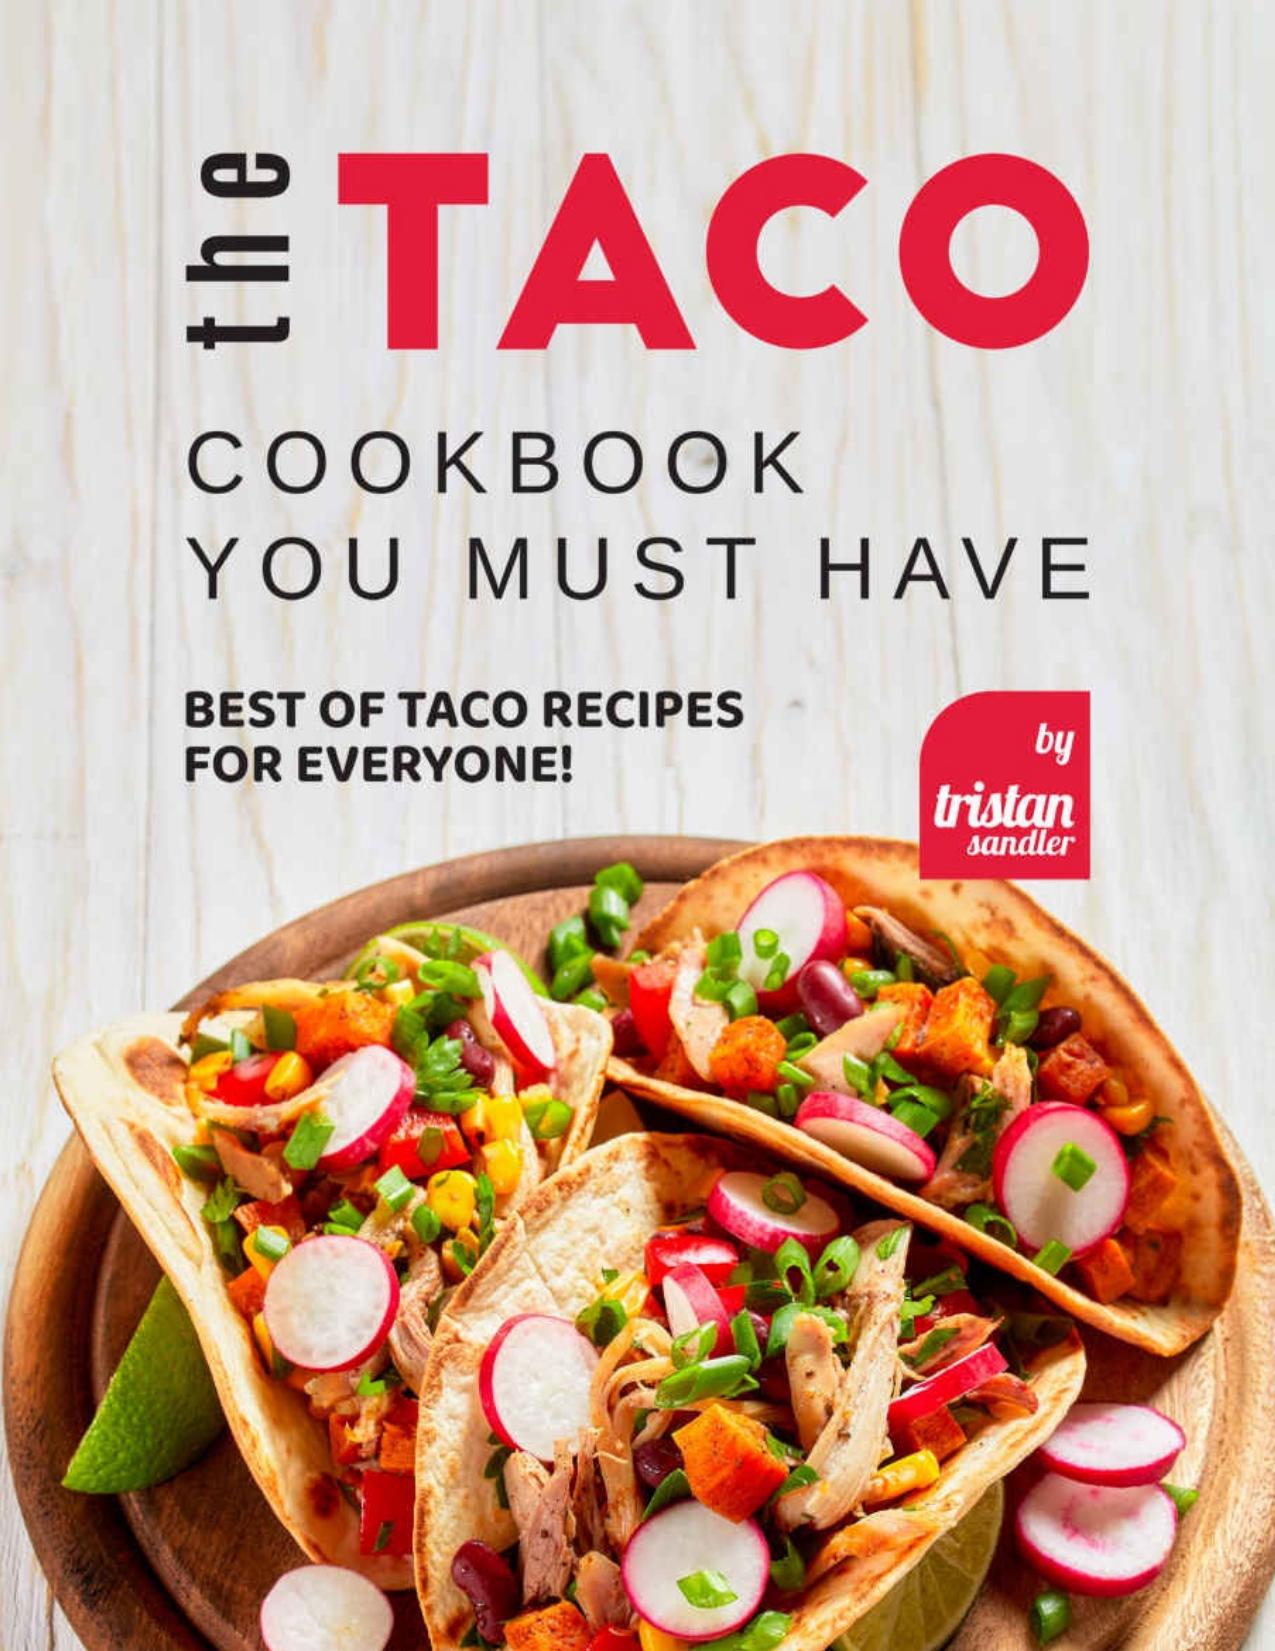 The Taco Cookbook You must have by Sandler Tristan